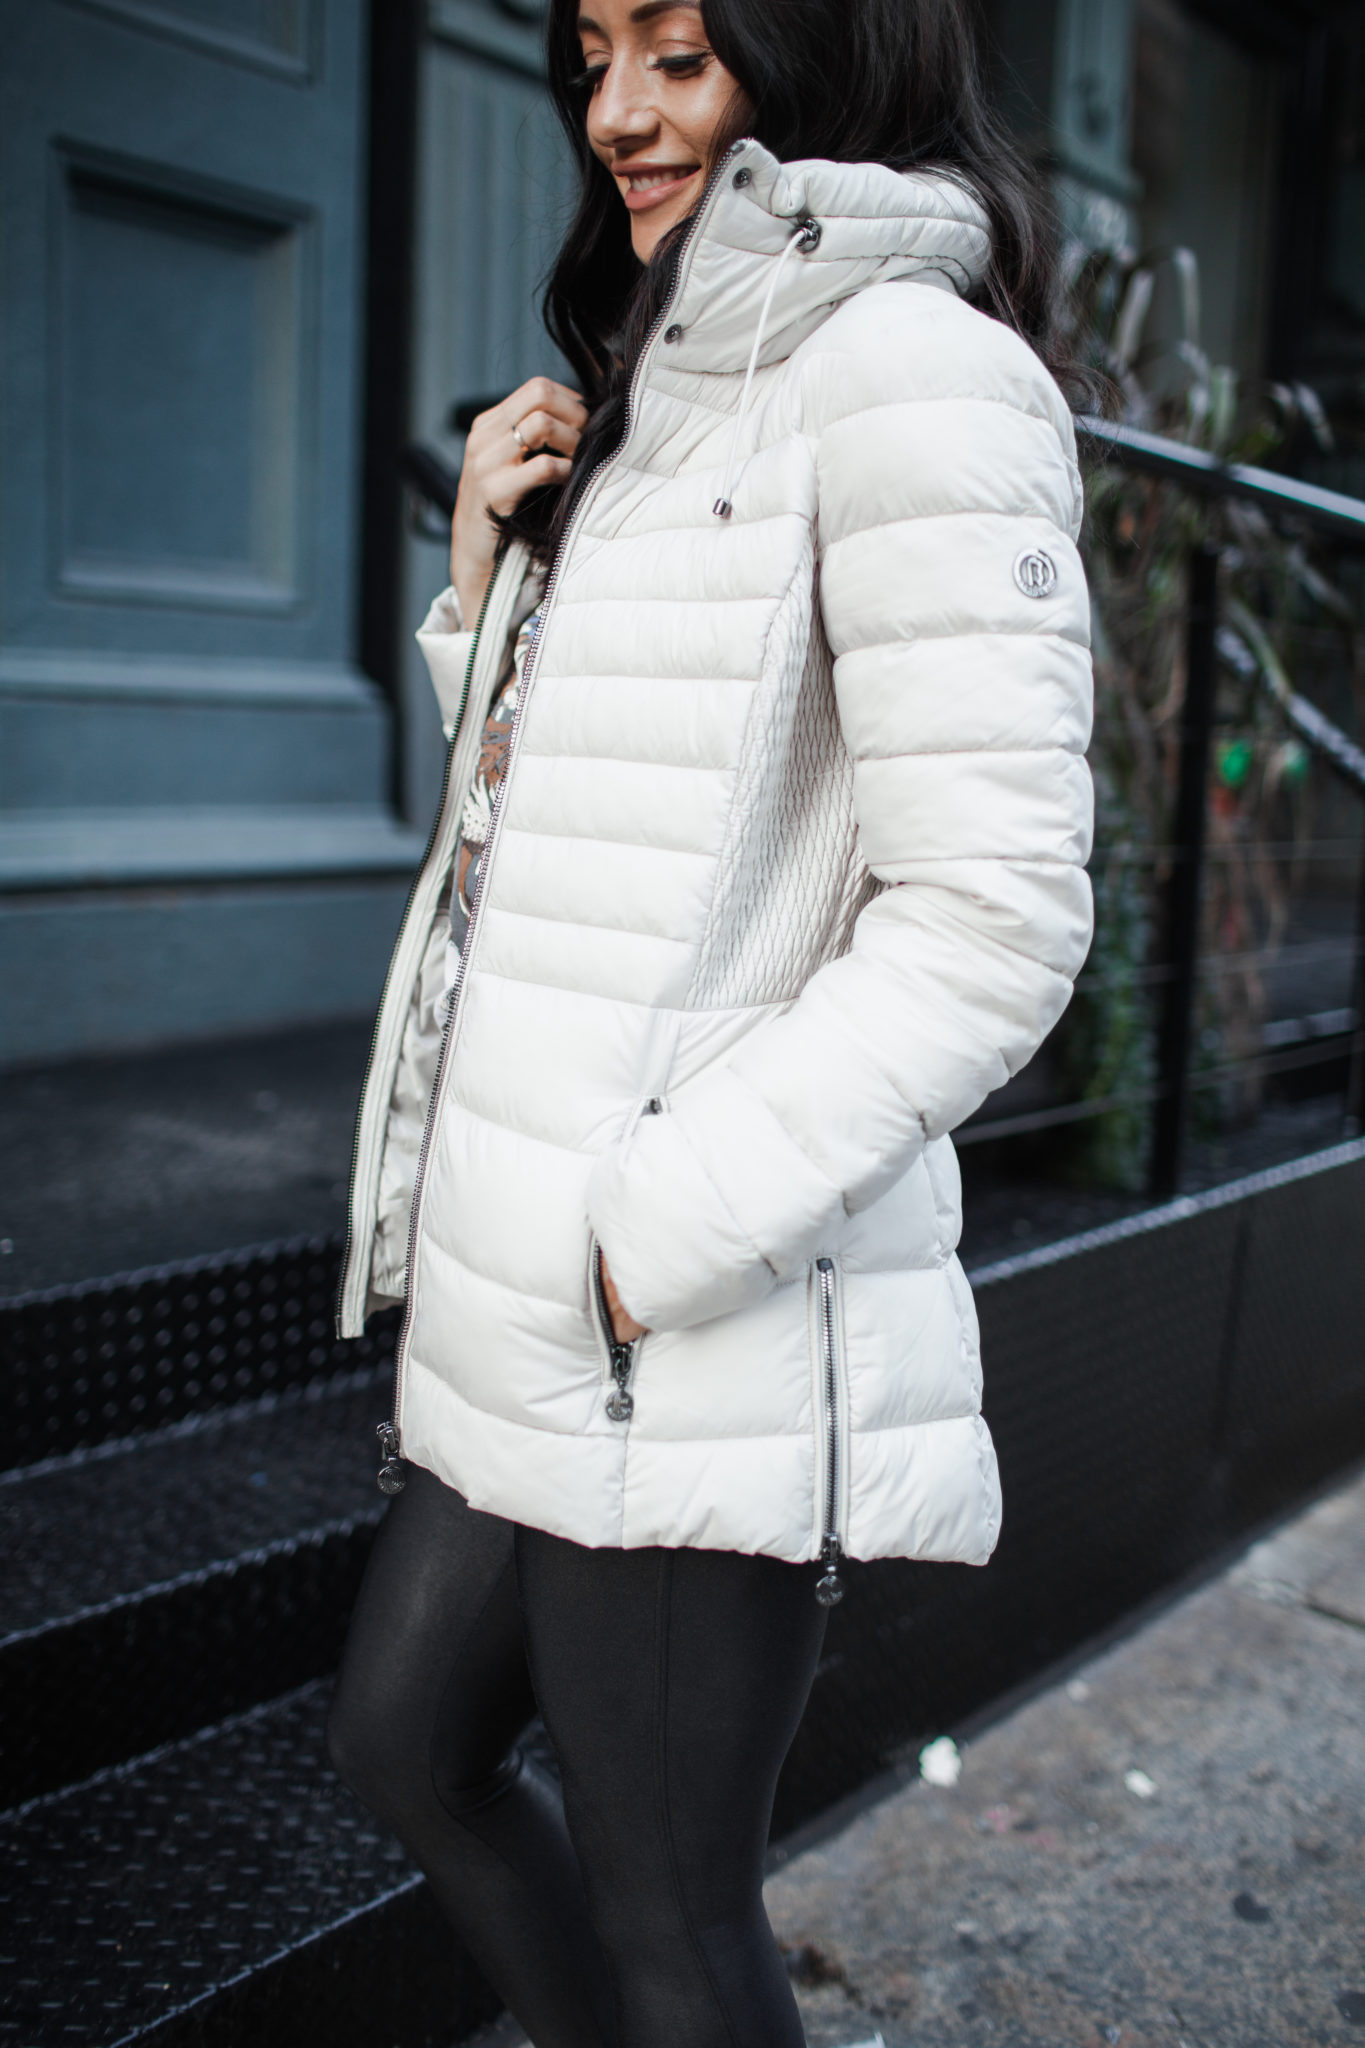 Cute Fall Jackets styled by top US fashion blog, Outfits & Outings: image of a woman wearing a Bernardo puffer jacket, faux leather leggings and white faux fur hiking boots.